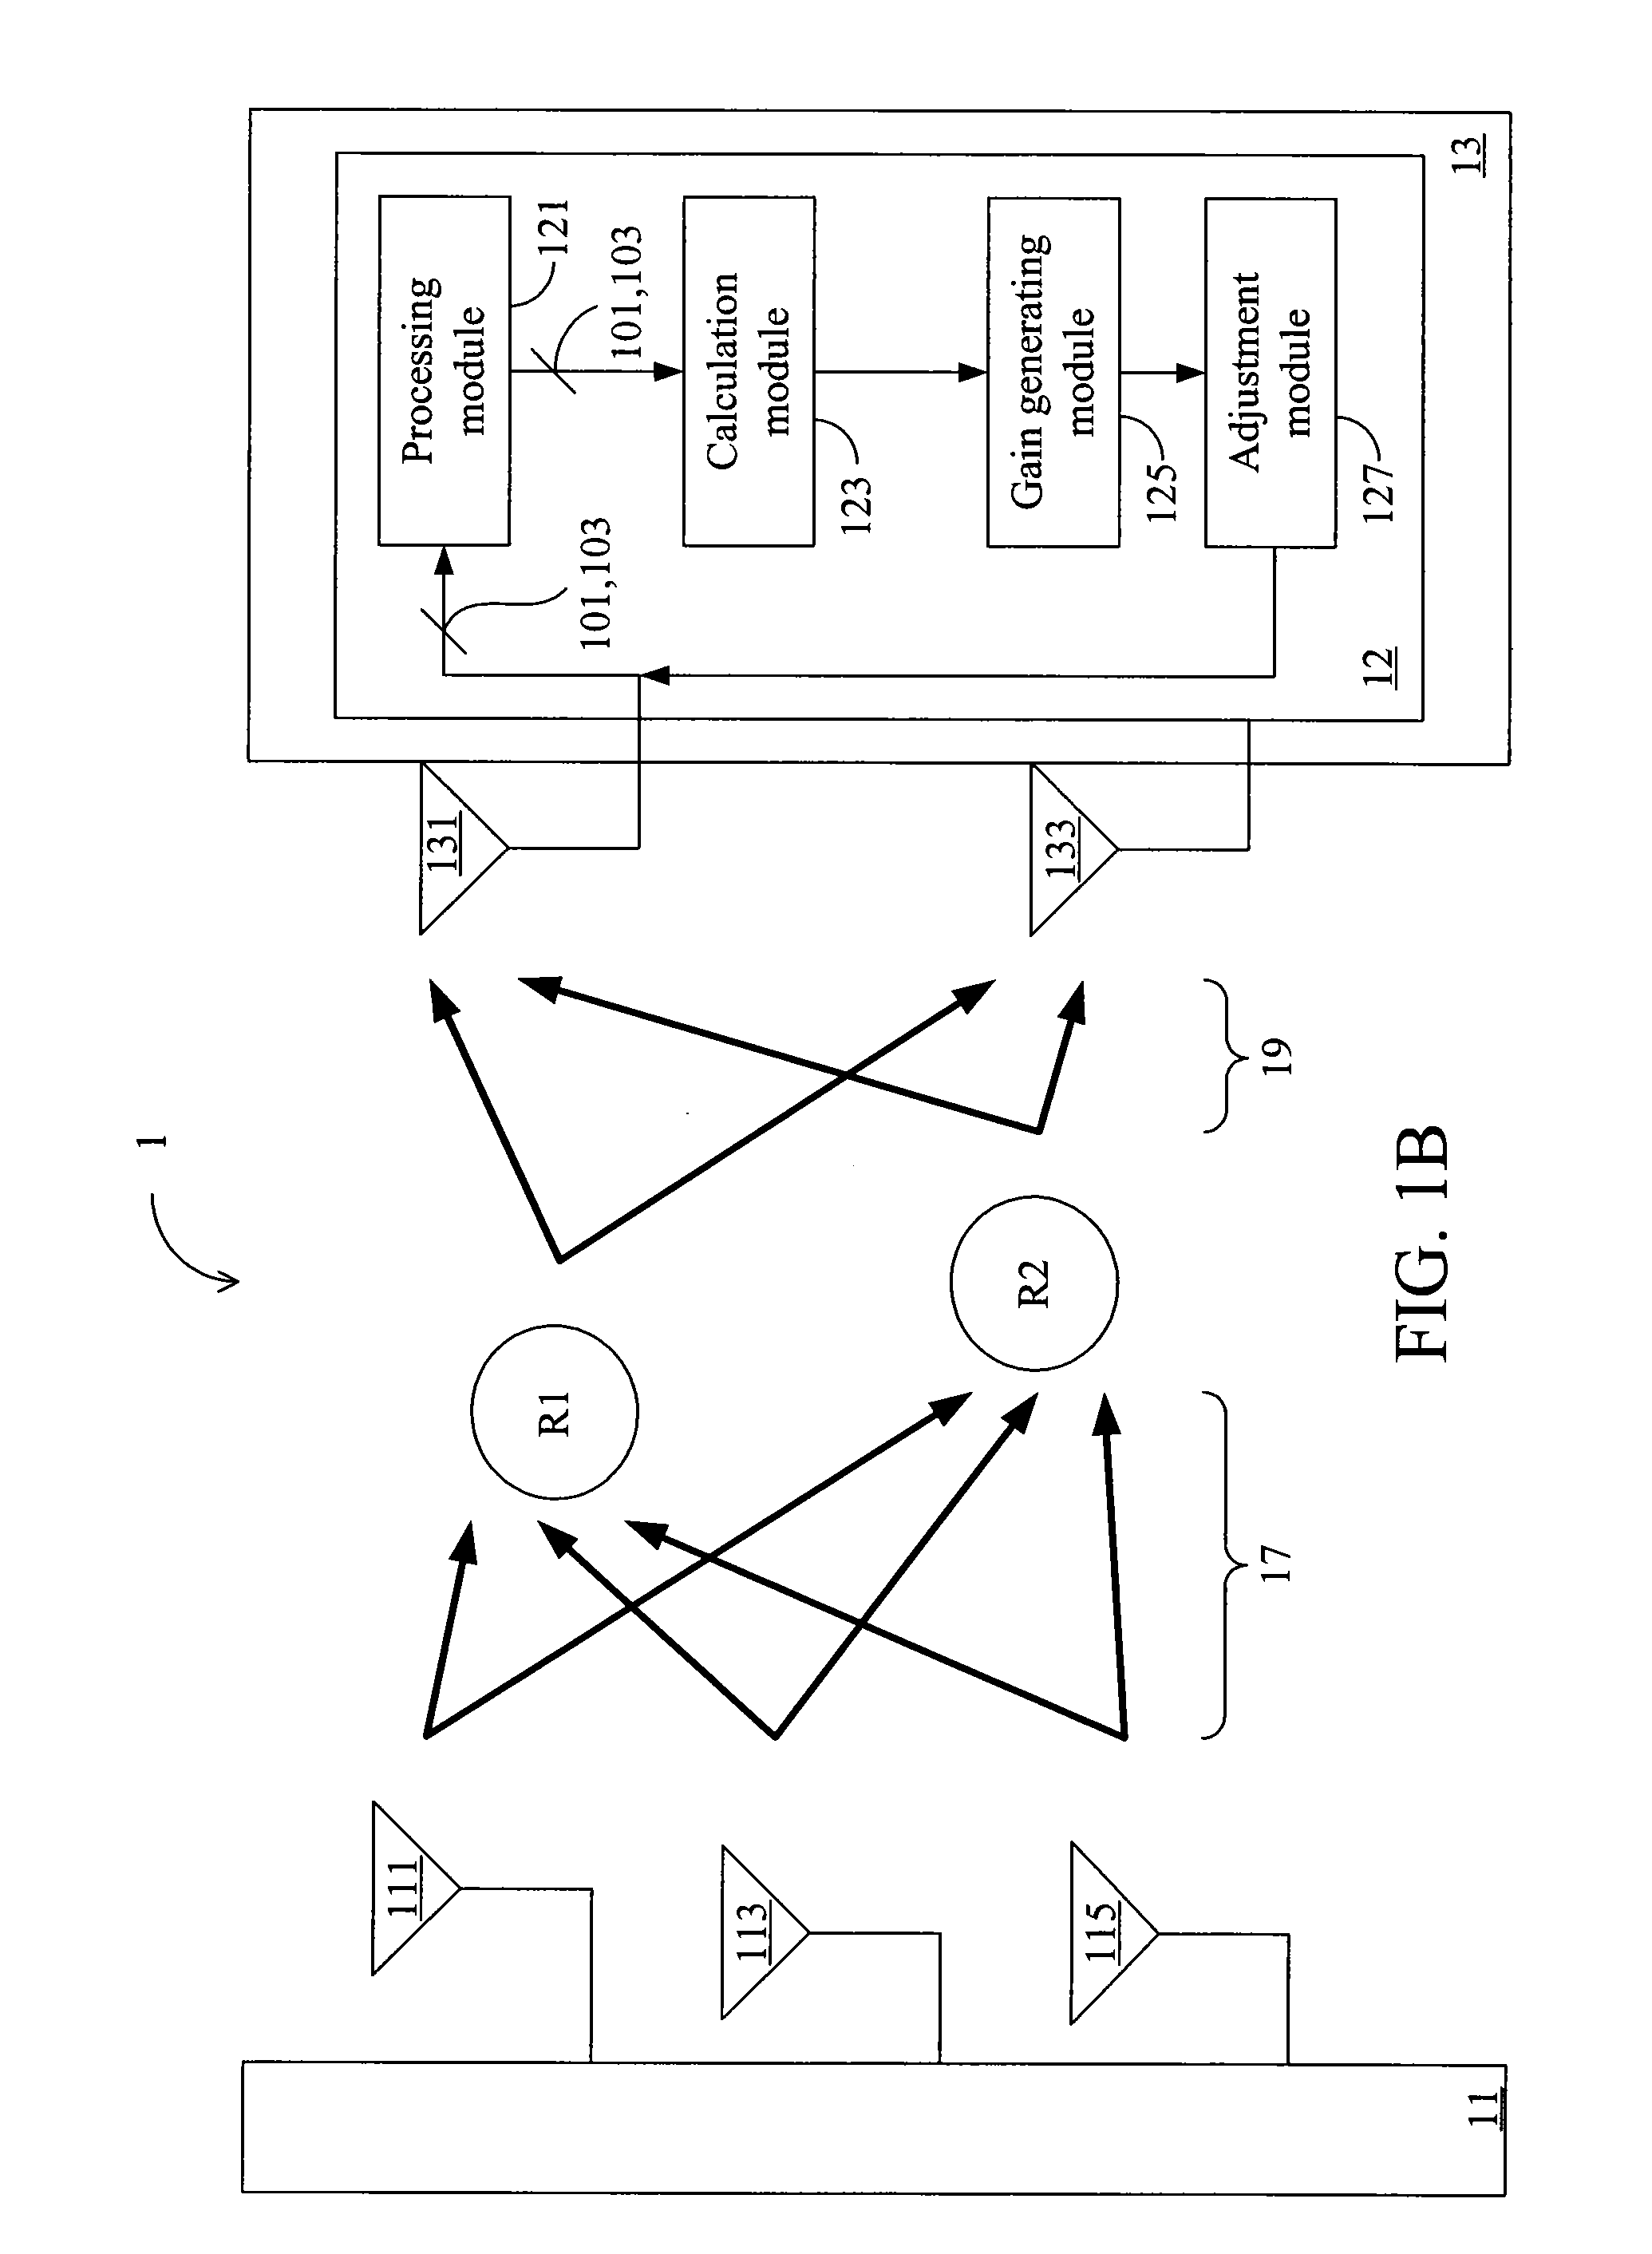 Gain adjustment apparatus, method, and tangible machine-readable medium thereof for a multiple input multiple output wireless communication system